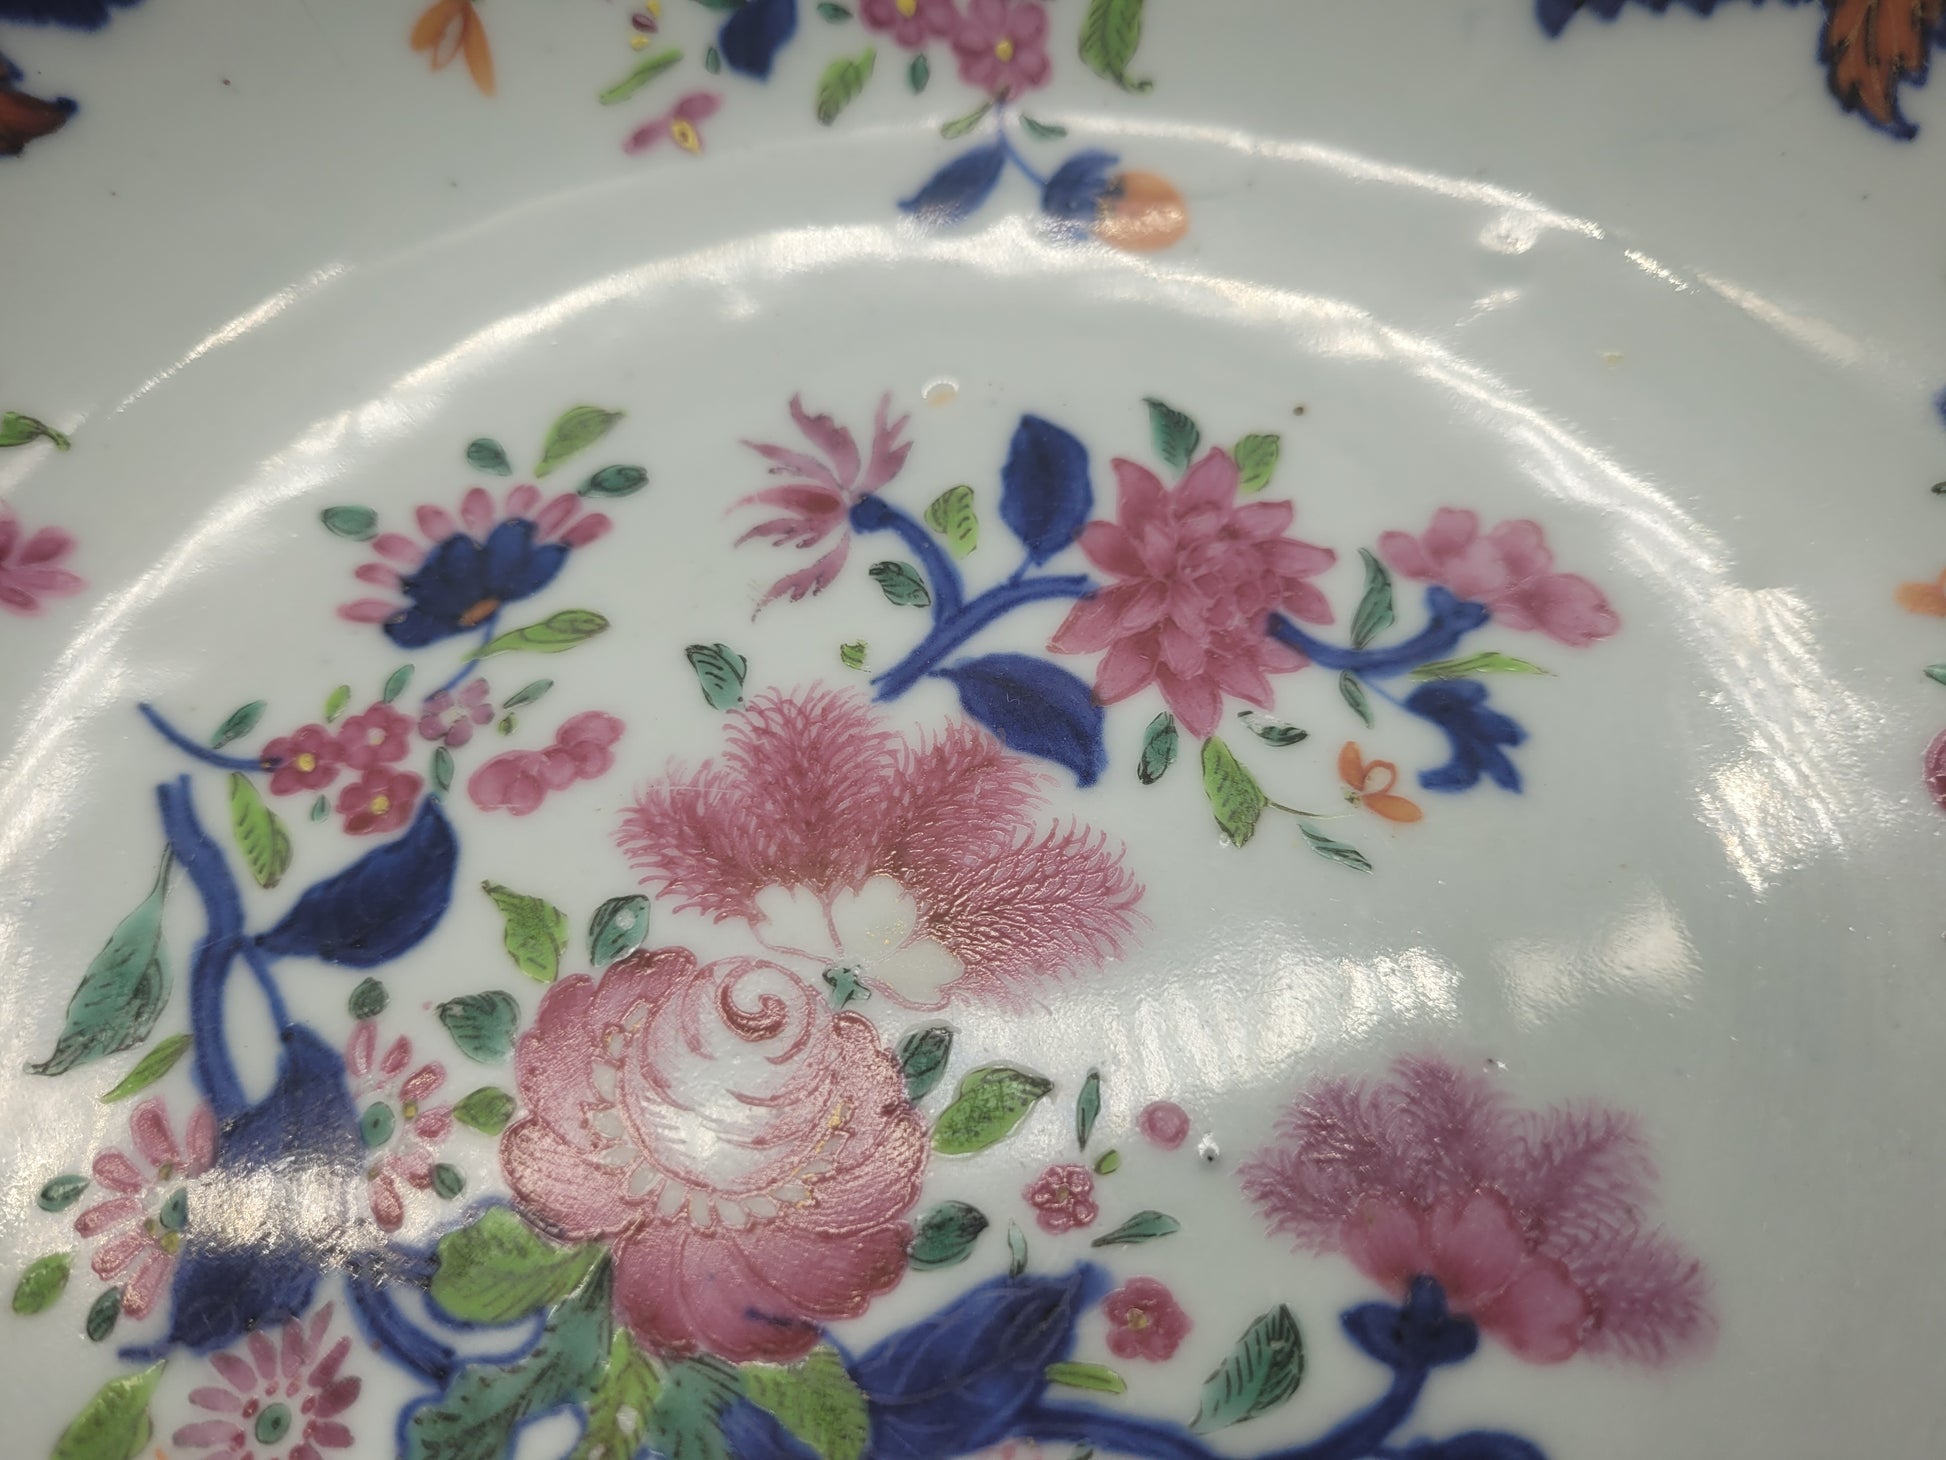 Christies auction Hong Kong Beautiful Extremely well decorated Chinese 18th / 19th Century Famille Rose Export Bowl